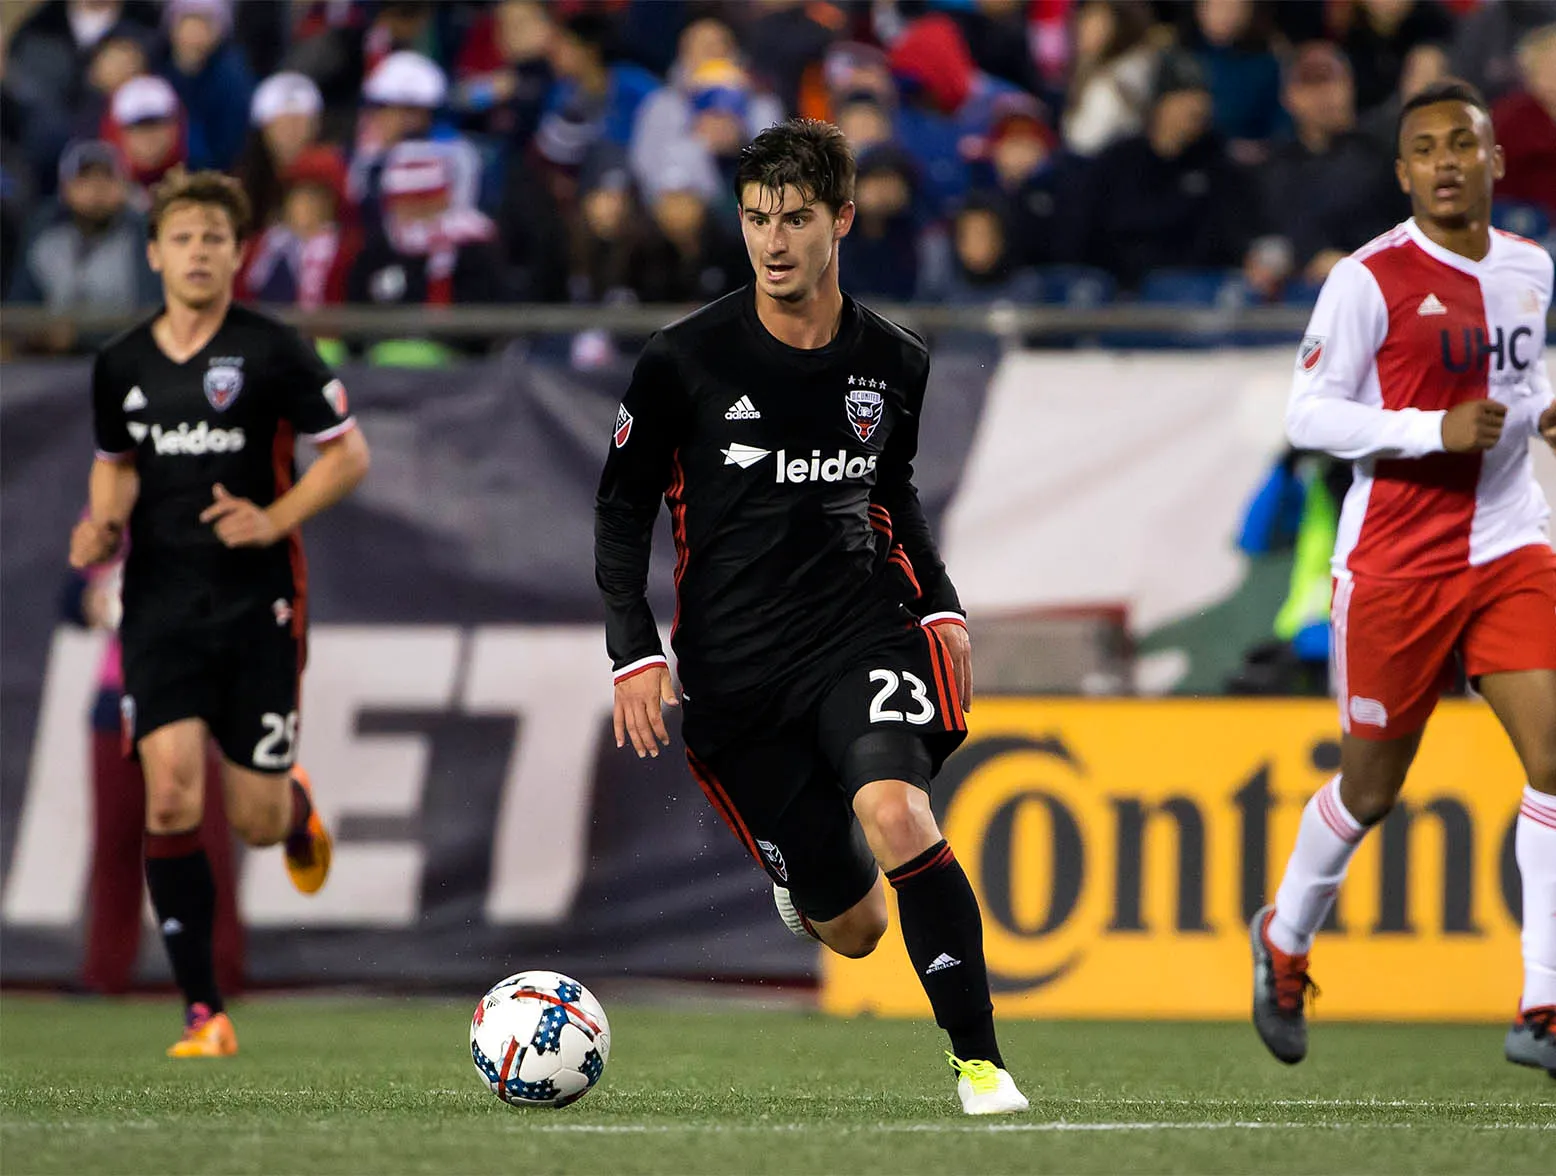 Apr 22, 2017; Foxborough, MA, USA; D.C. United midfielder Ian Harkes (23) carries the ball past New England Revolution forward Juan Agudelo (17) during the second half of their 2-2 tie at Gillette Stadium. Mandatory Credit: Winslow Townson-USA TODAY Sports